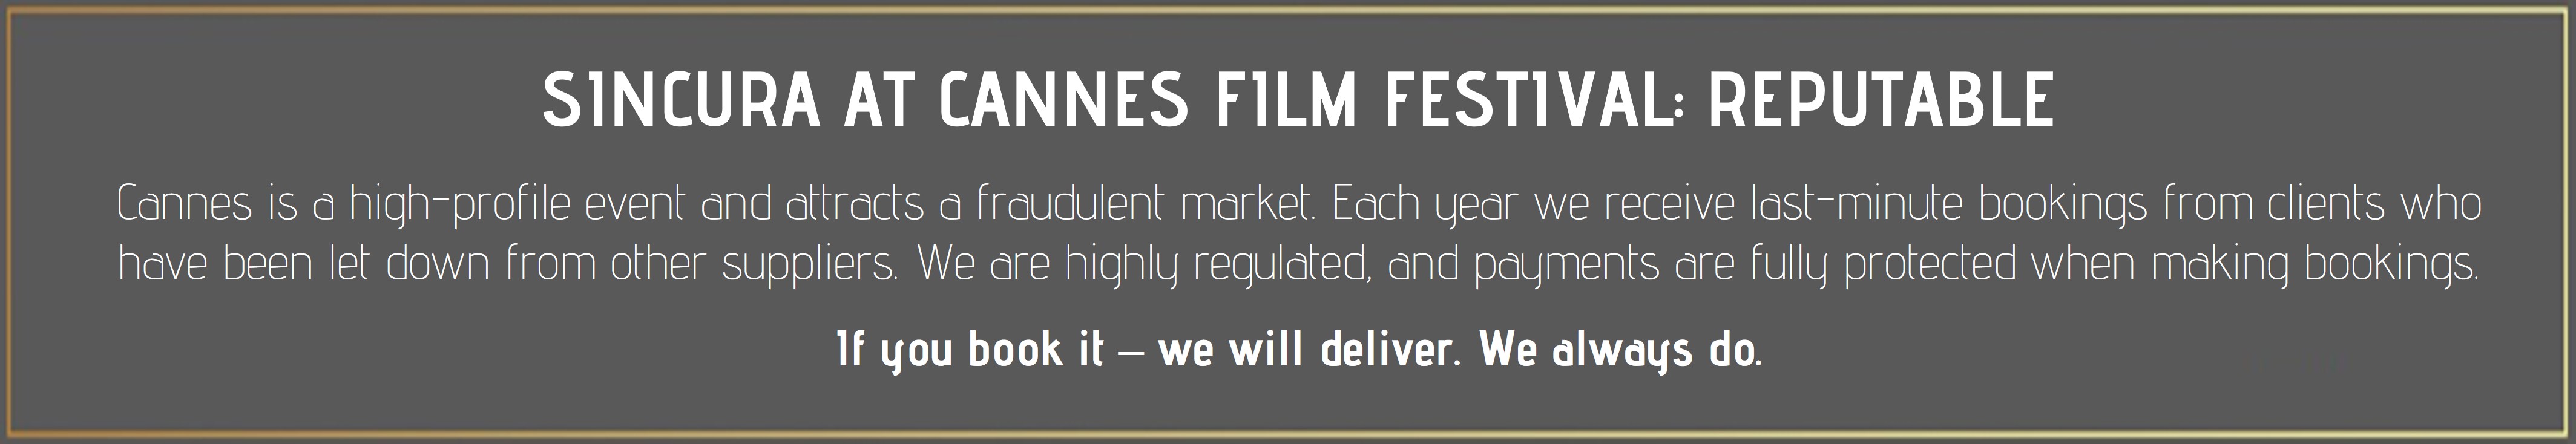 discounted tickets to cannes film festival